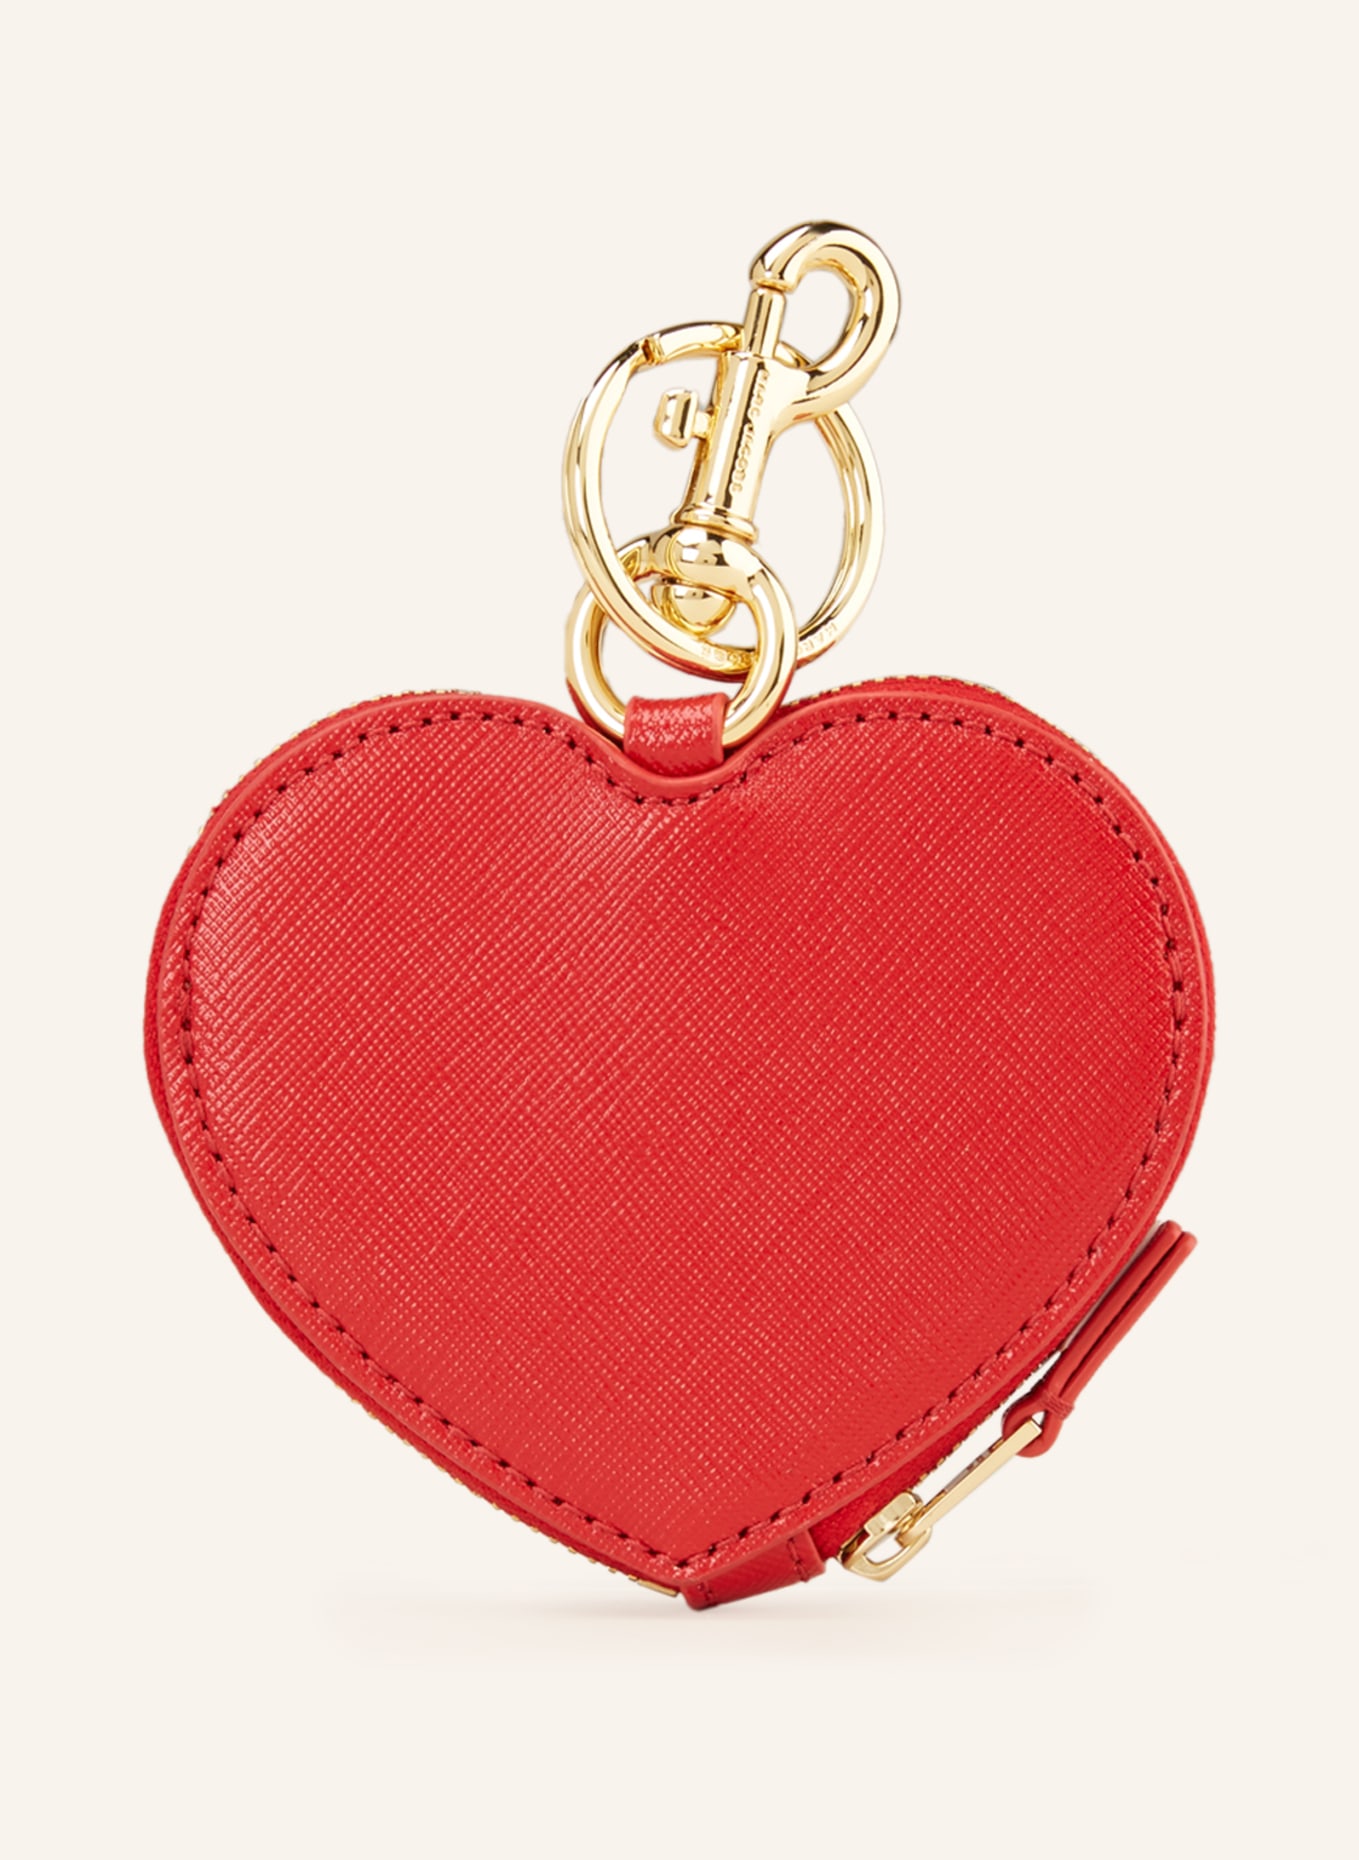 MARC JACOBS Münzetui THE HEART POUCH, Farbe: DUNKELROT/ GOLD (Bild 2)